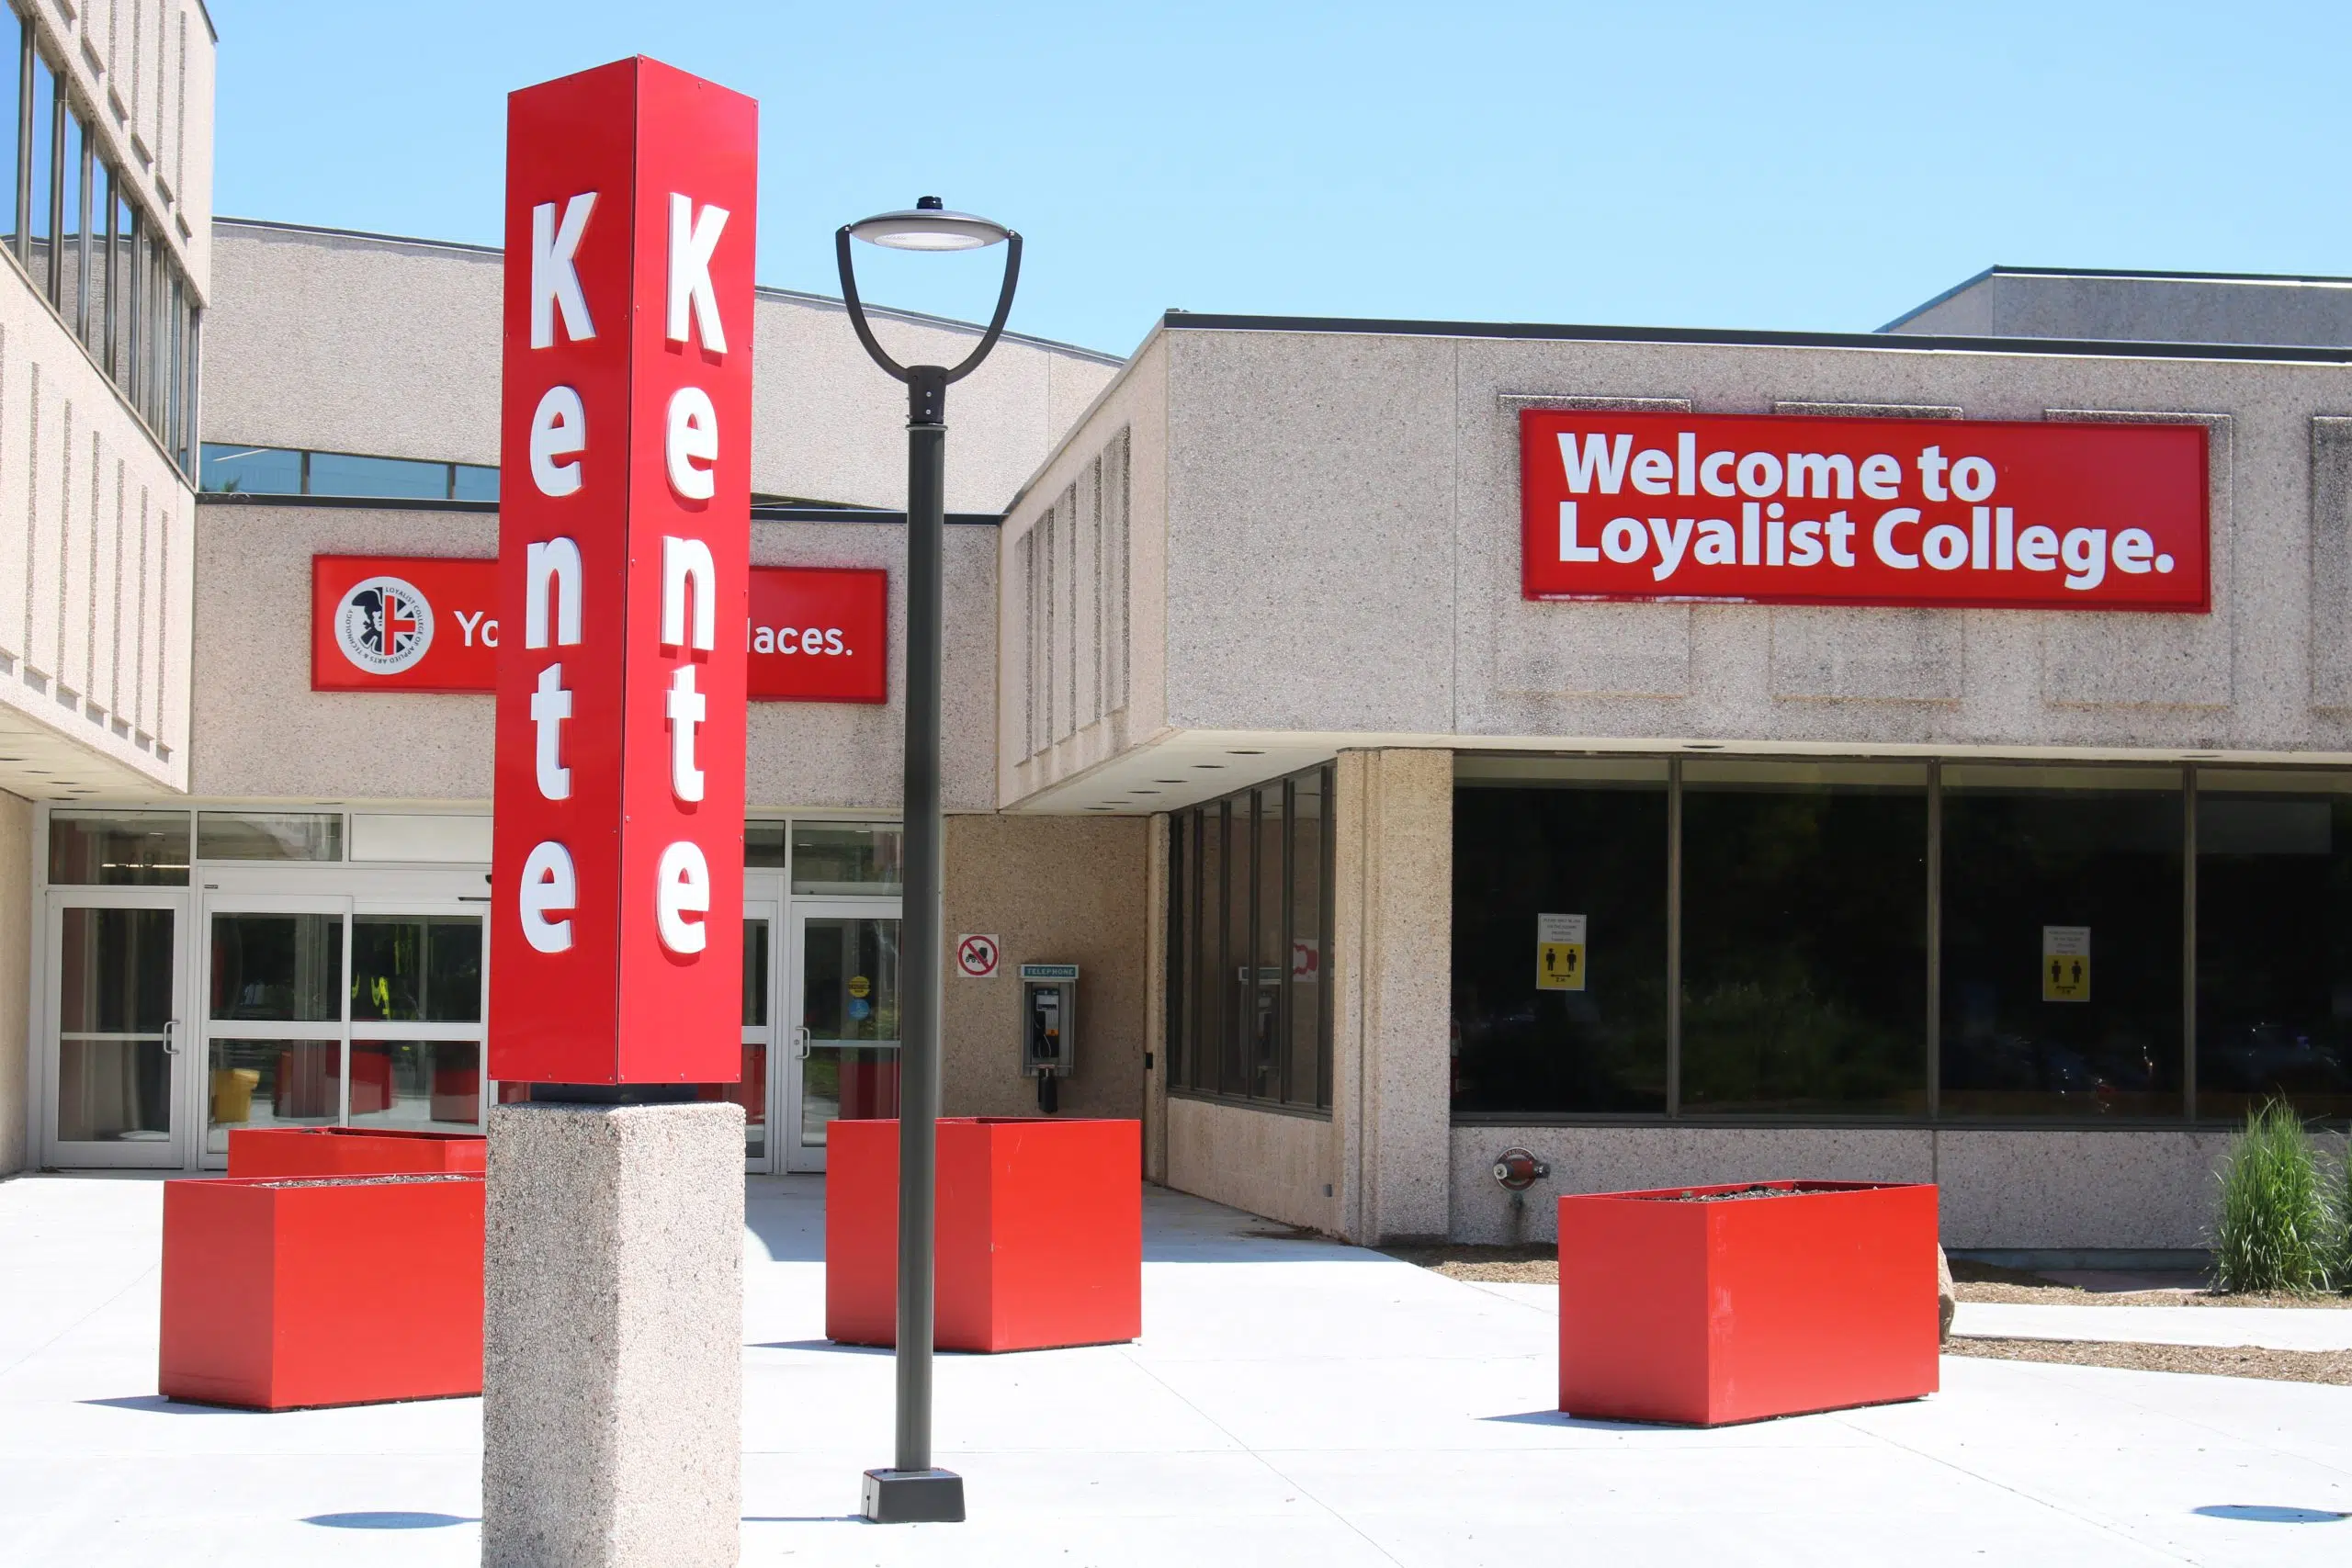 Applications for nursing programs up this year: Loyalist College